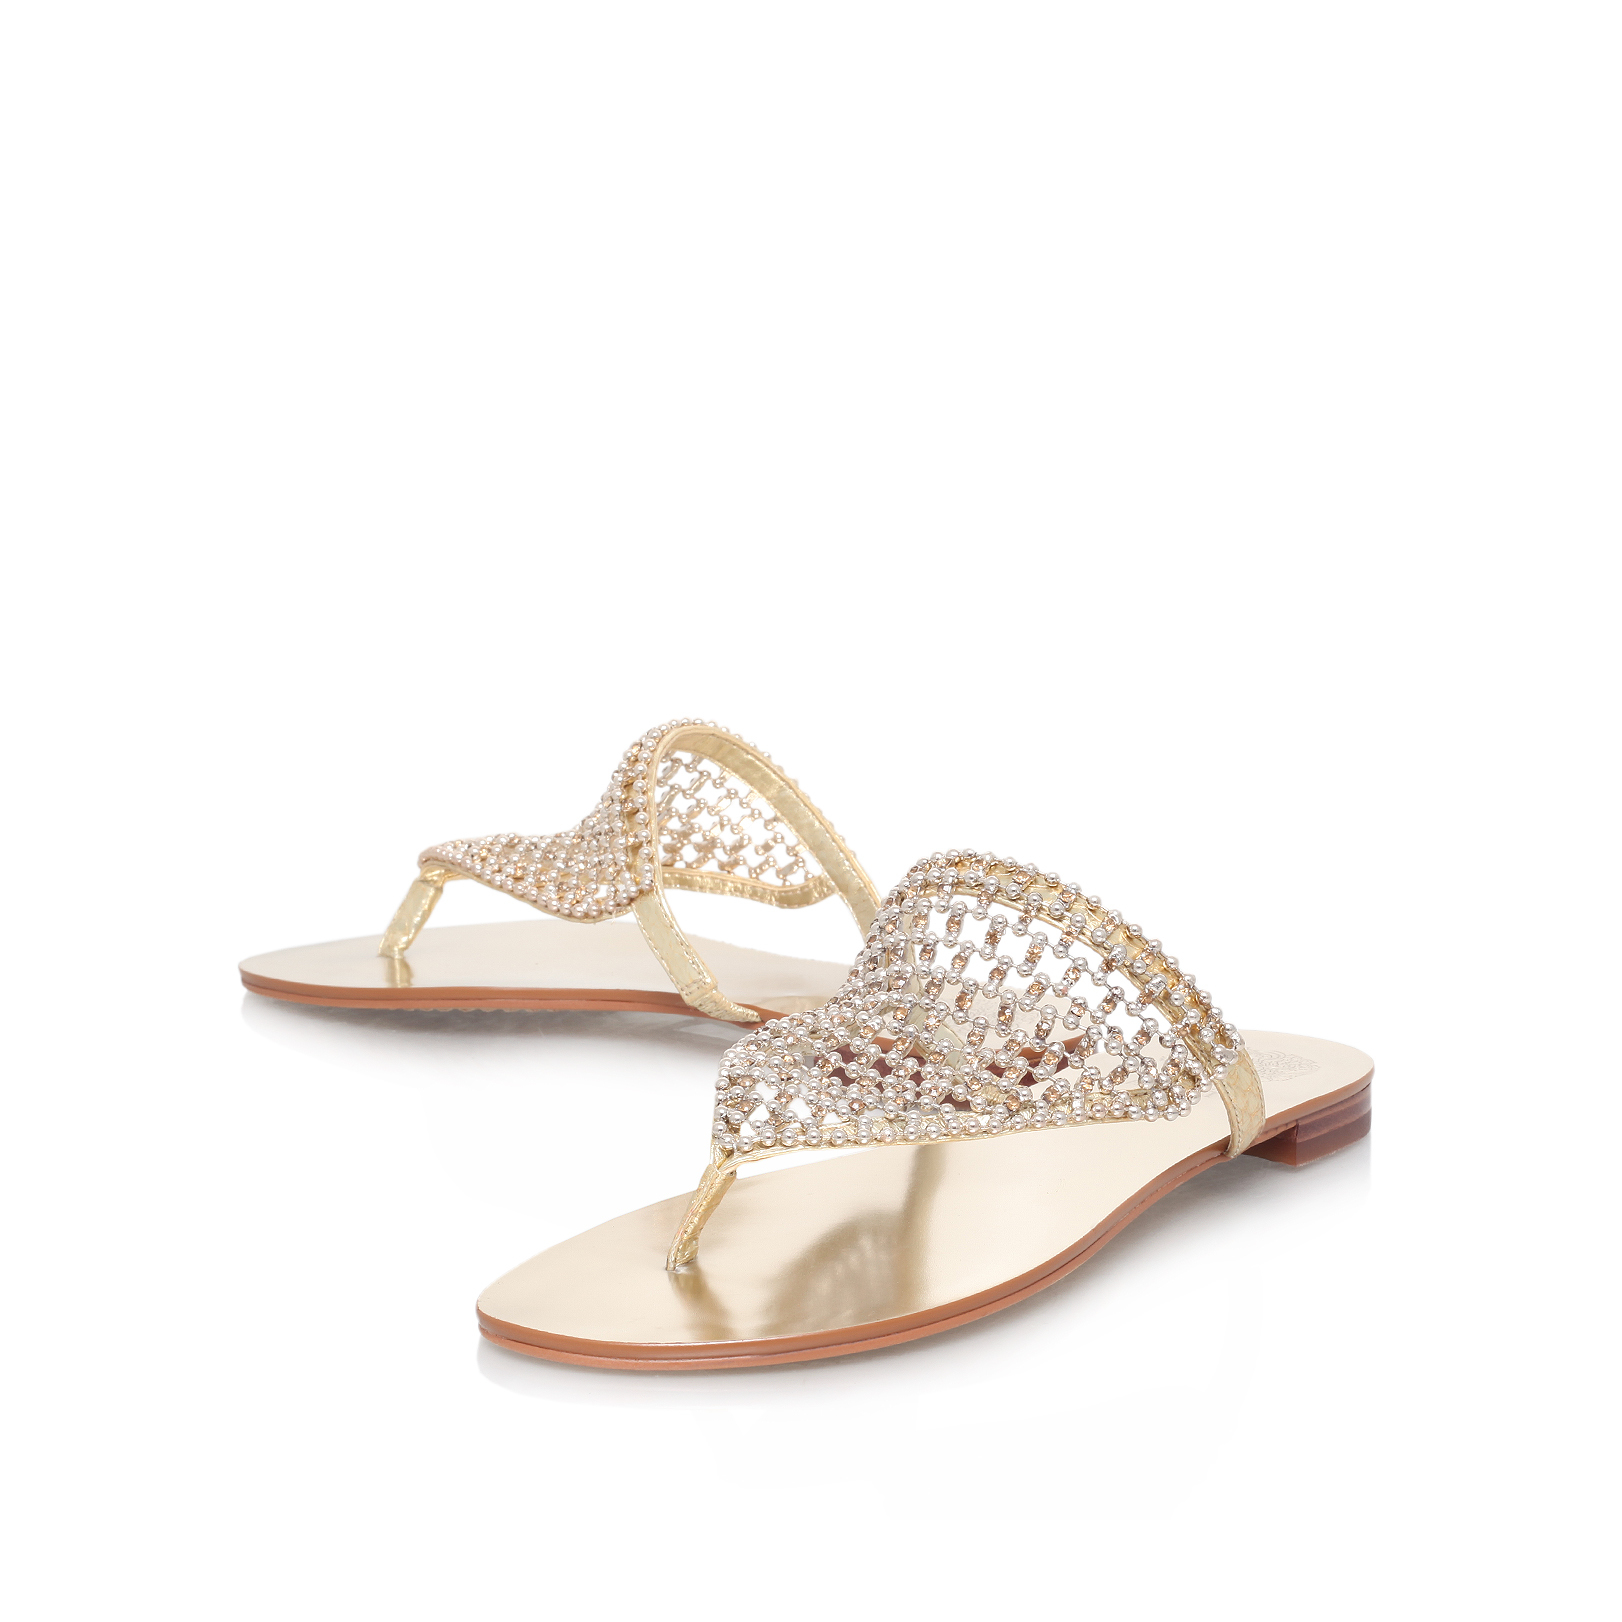 Vince Camuto | MOMBO Gold Flat Sandals by VINCE CAMUTO